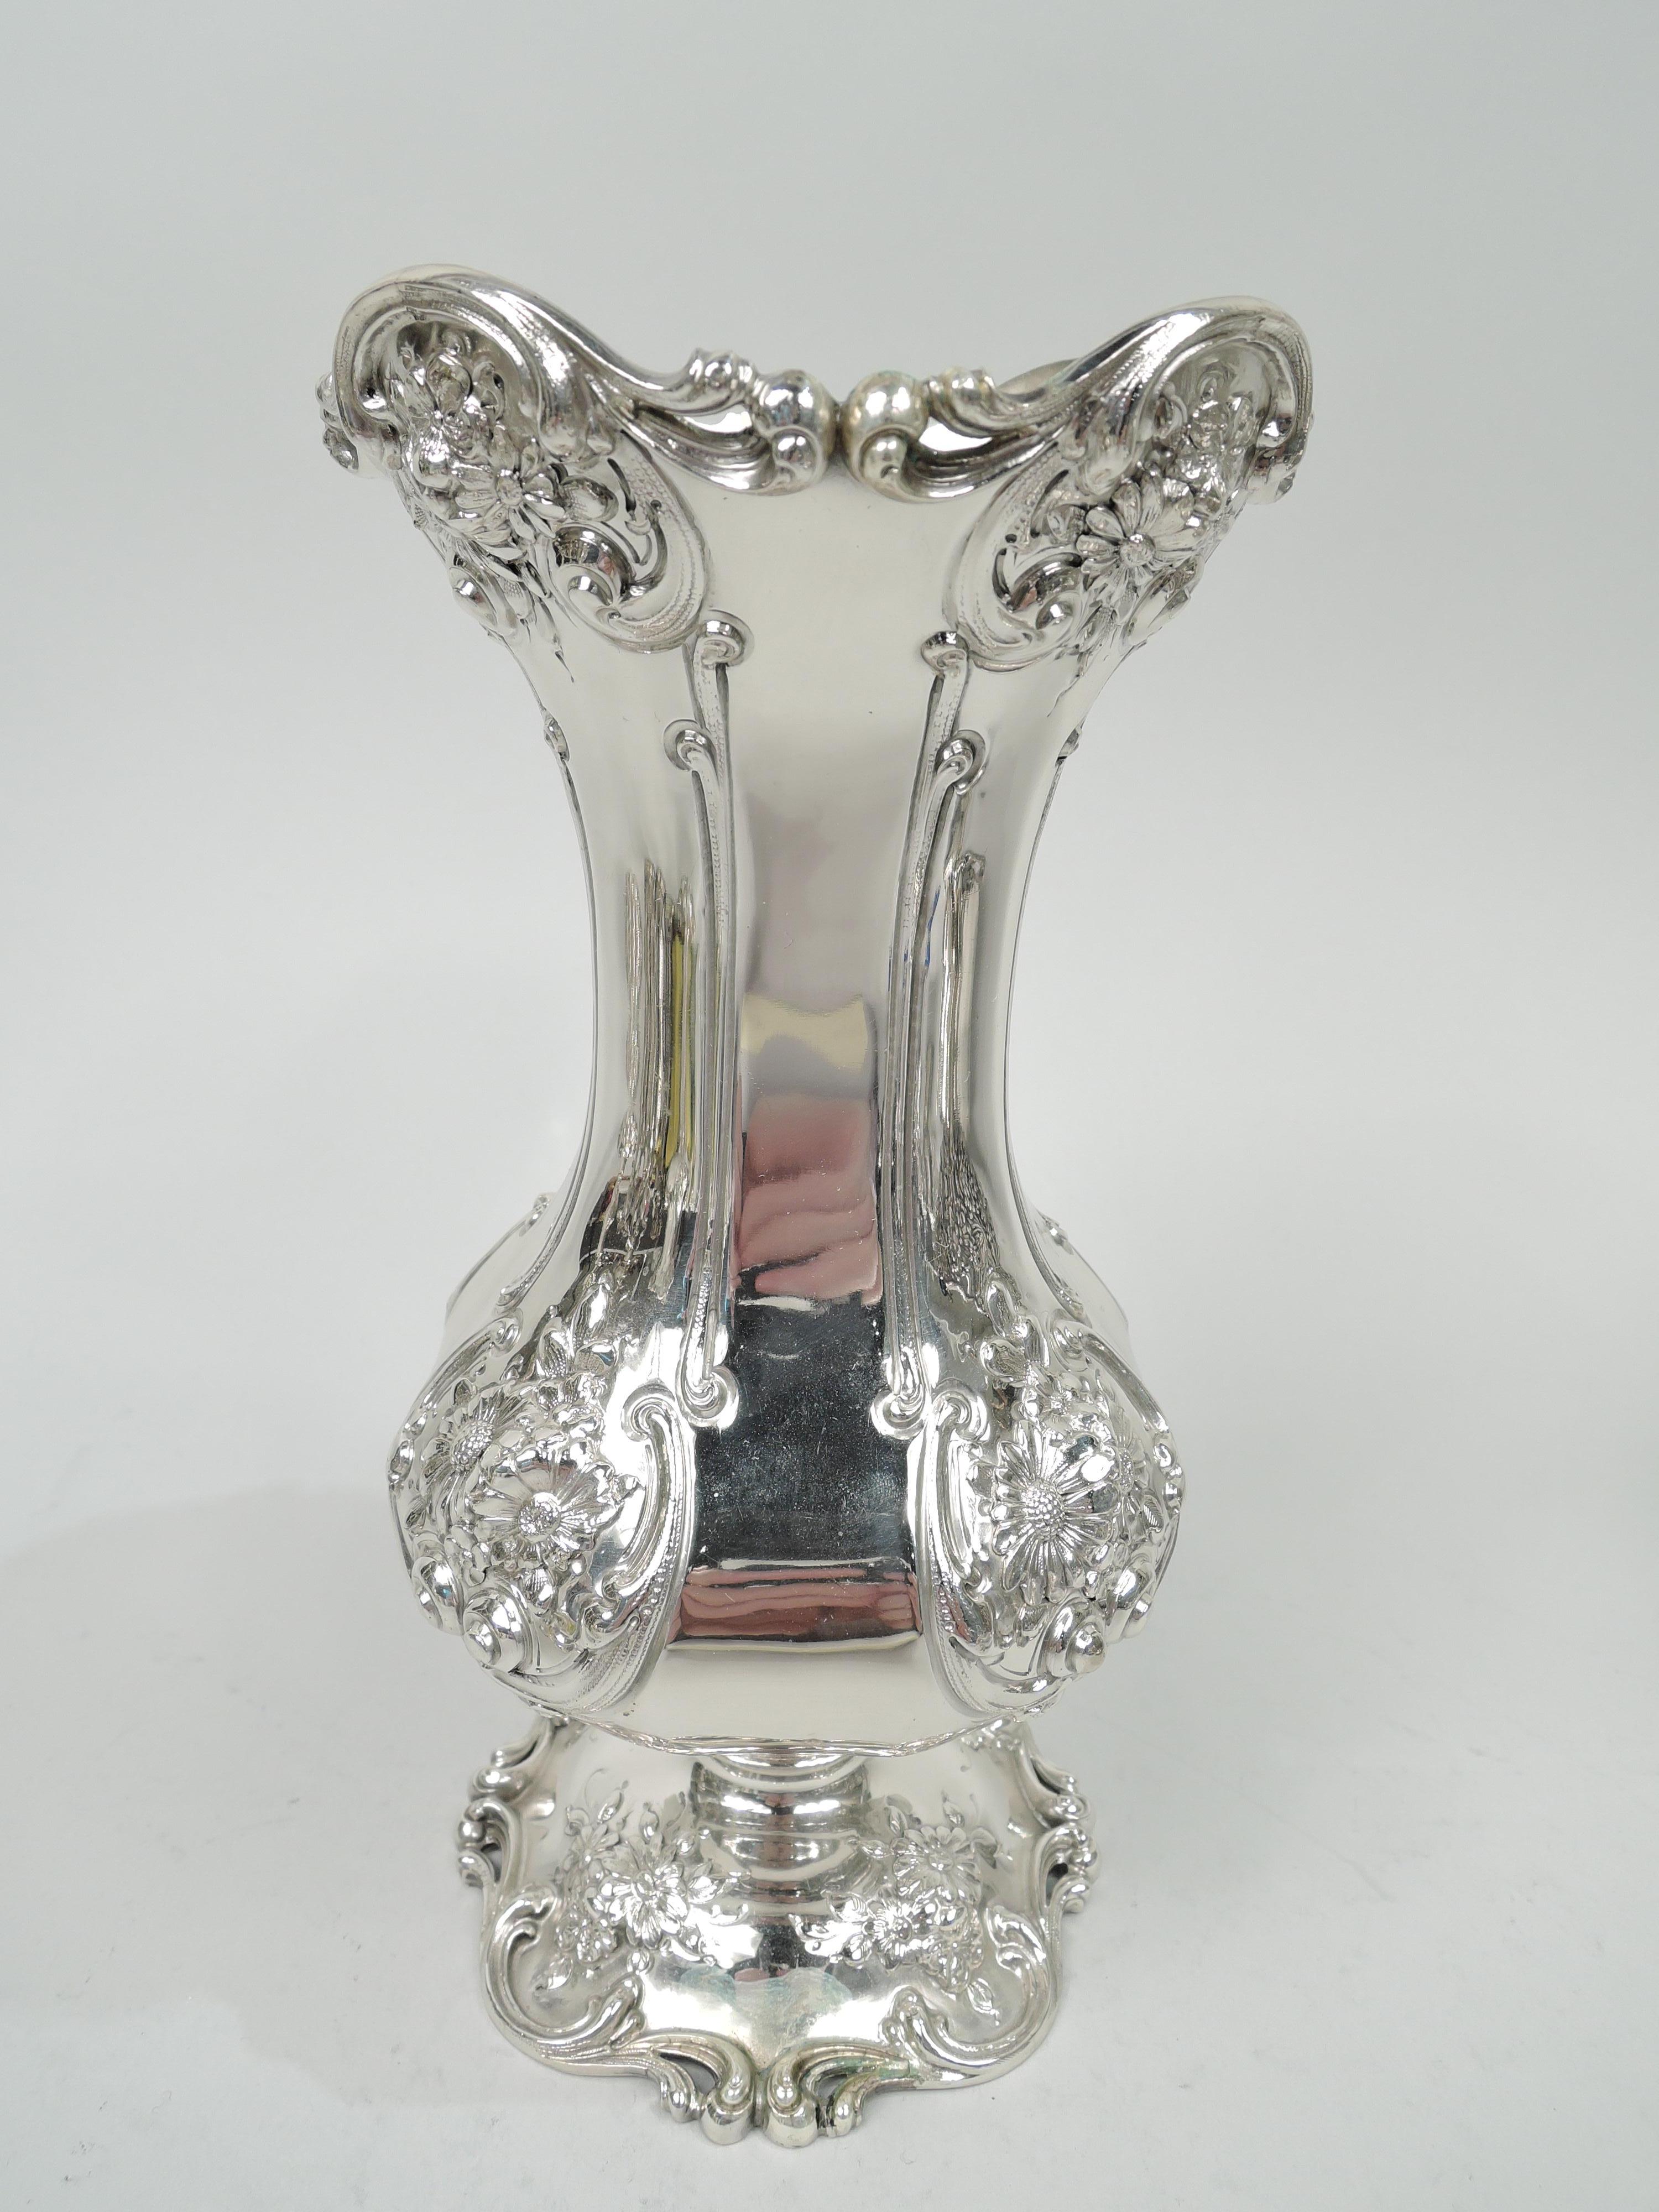 Victorian sterling silver vase. Made by Redlich in New York, circa 1900. Wide quadrilateral baluster with flared rim and domed foot. Chased scrolled frames inset with flowers at rim and bowl corners. Raised flower clusters on foot. Rims have applied